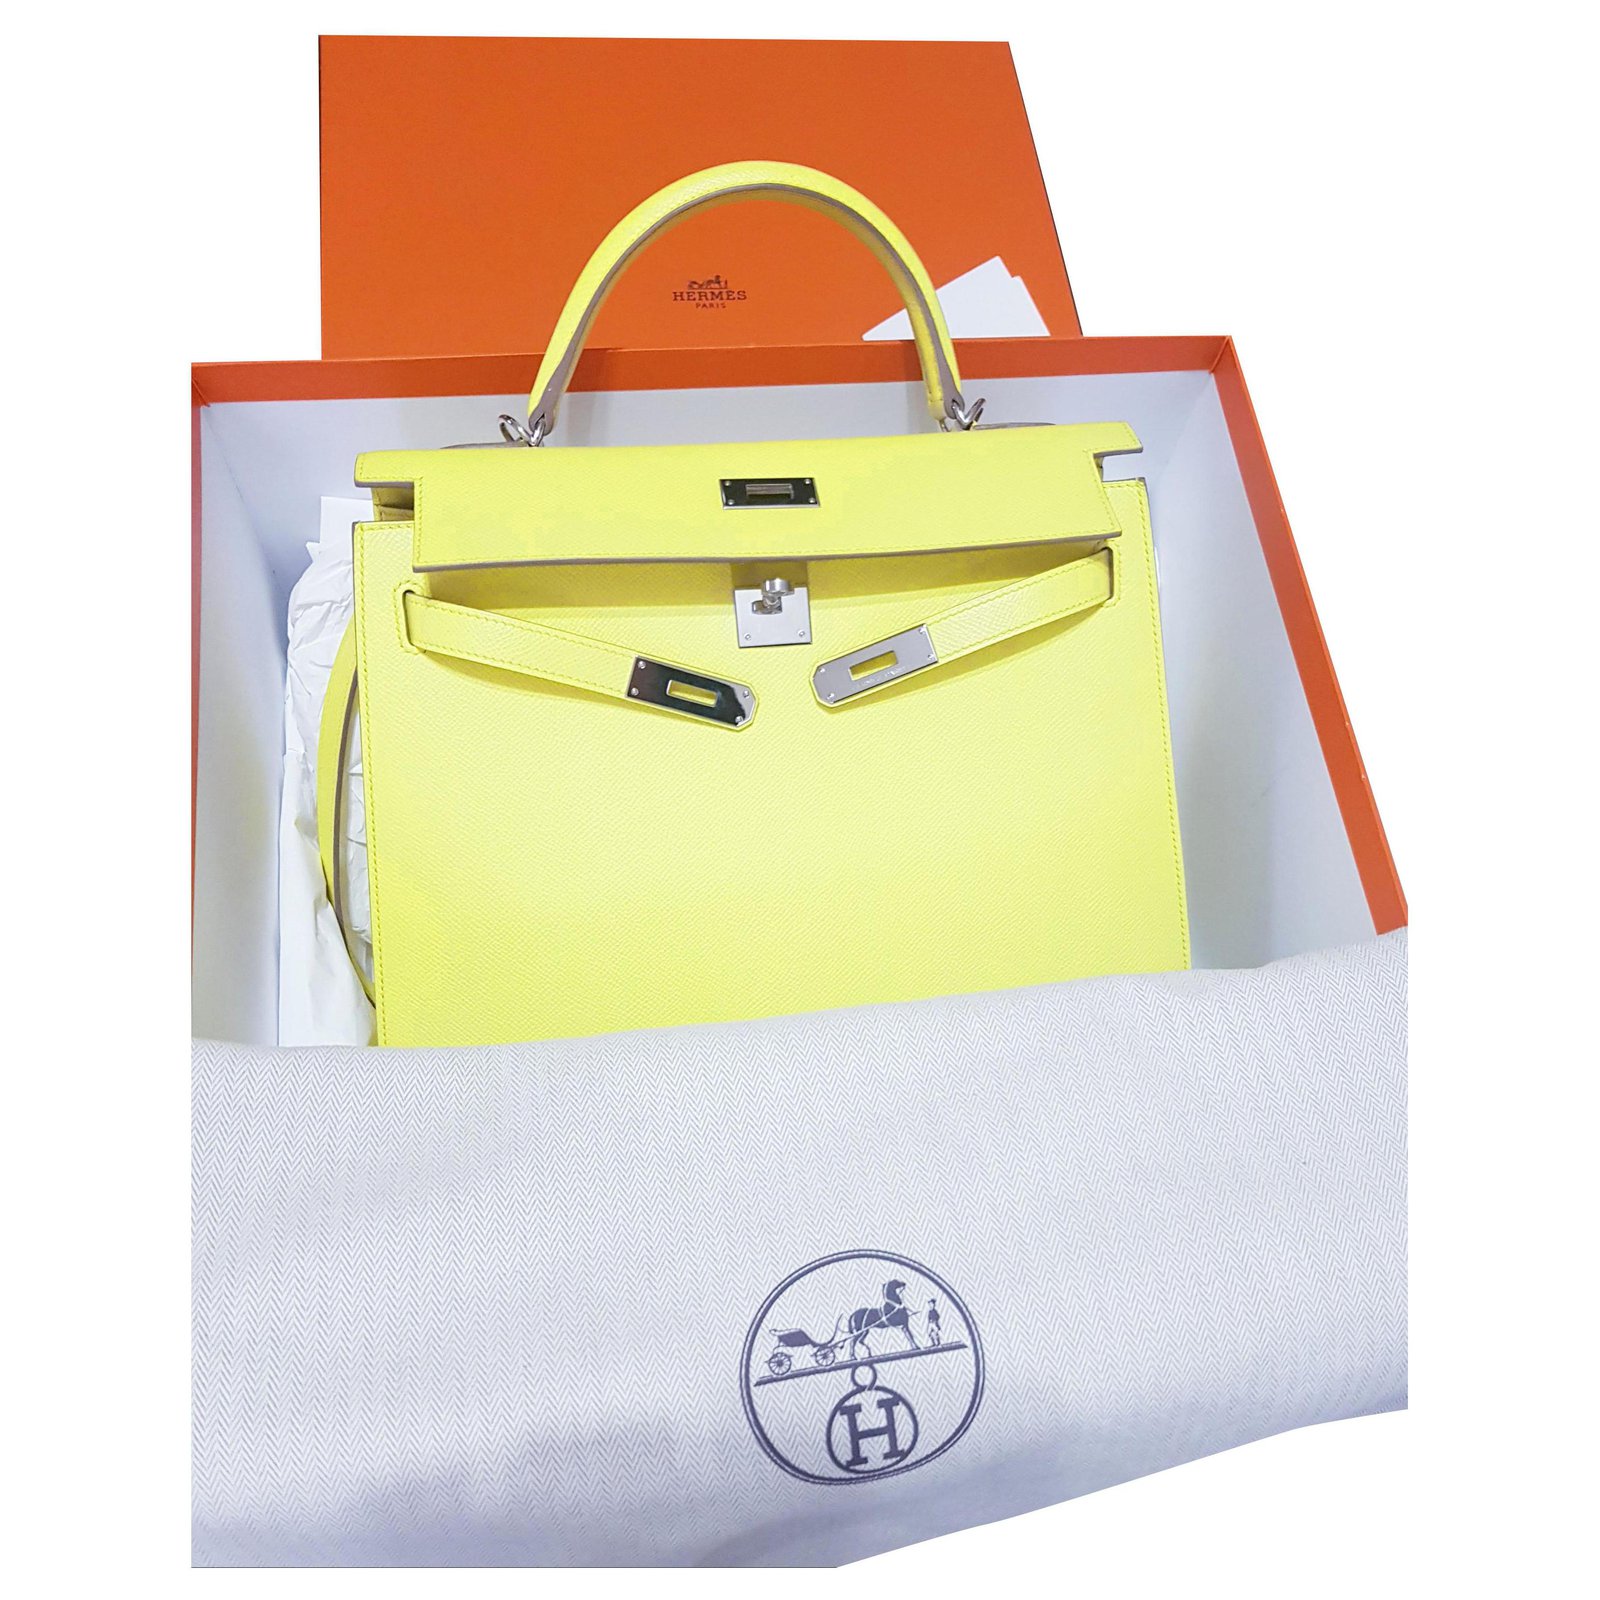 Jaune Sellier Kelly 32cm in Epsom Leather with Gold Hardware, 2000, Handbags & Accessories, 2021